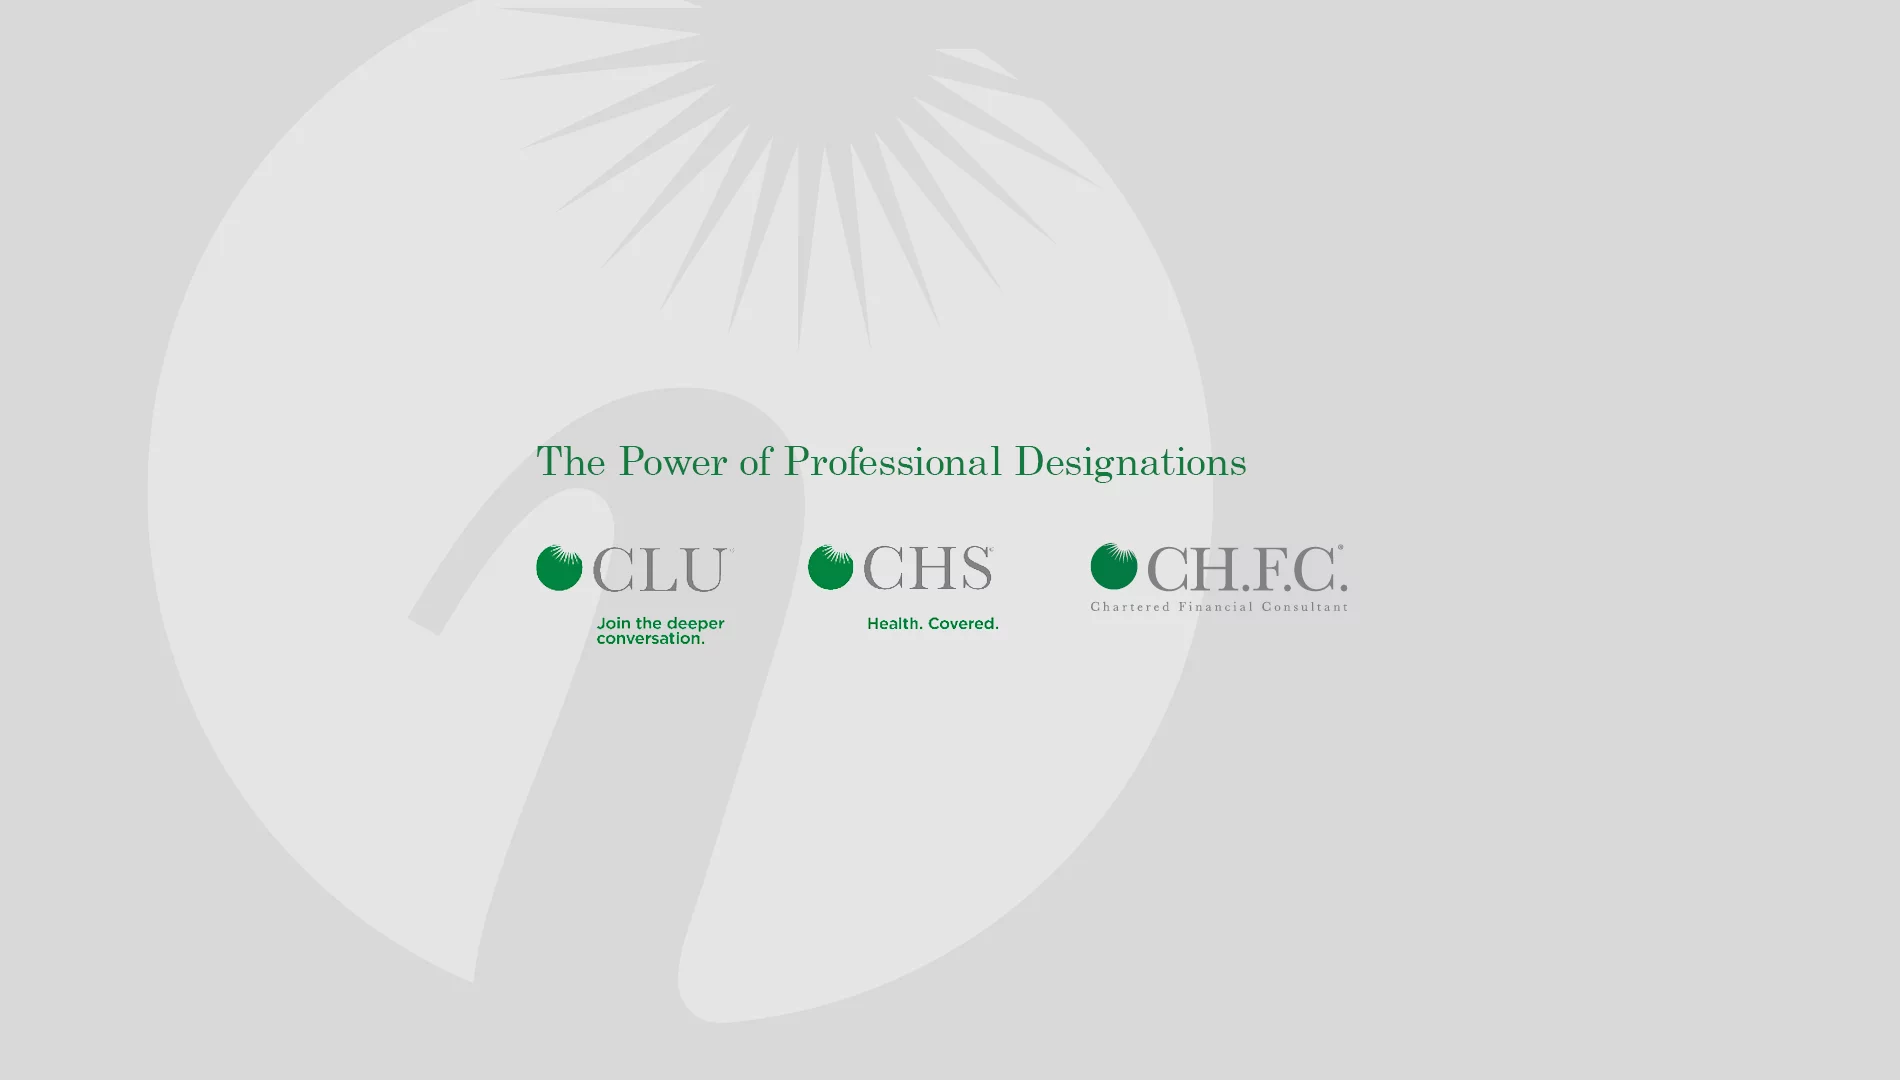 the power of professional designations - the institute for advanced financial education clu chs ch.f.c. designation